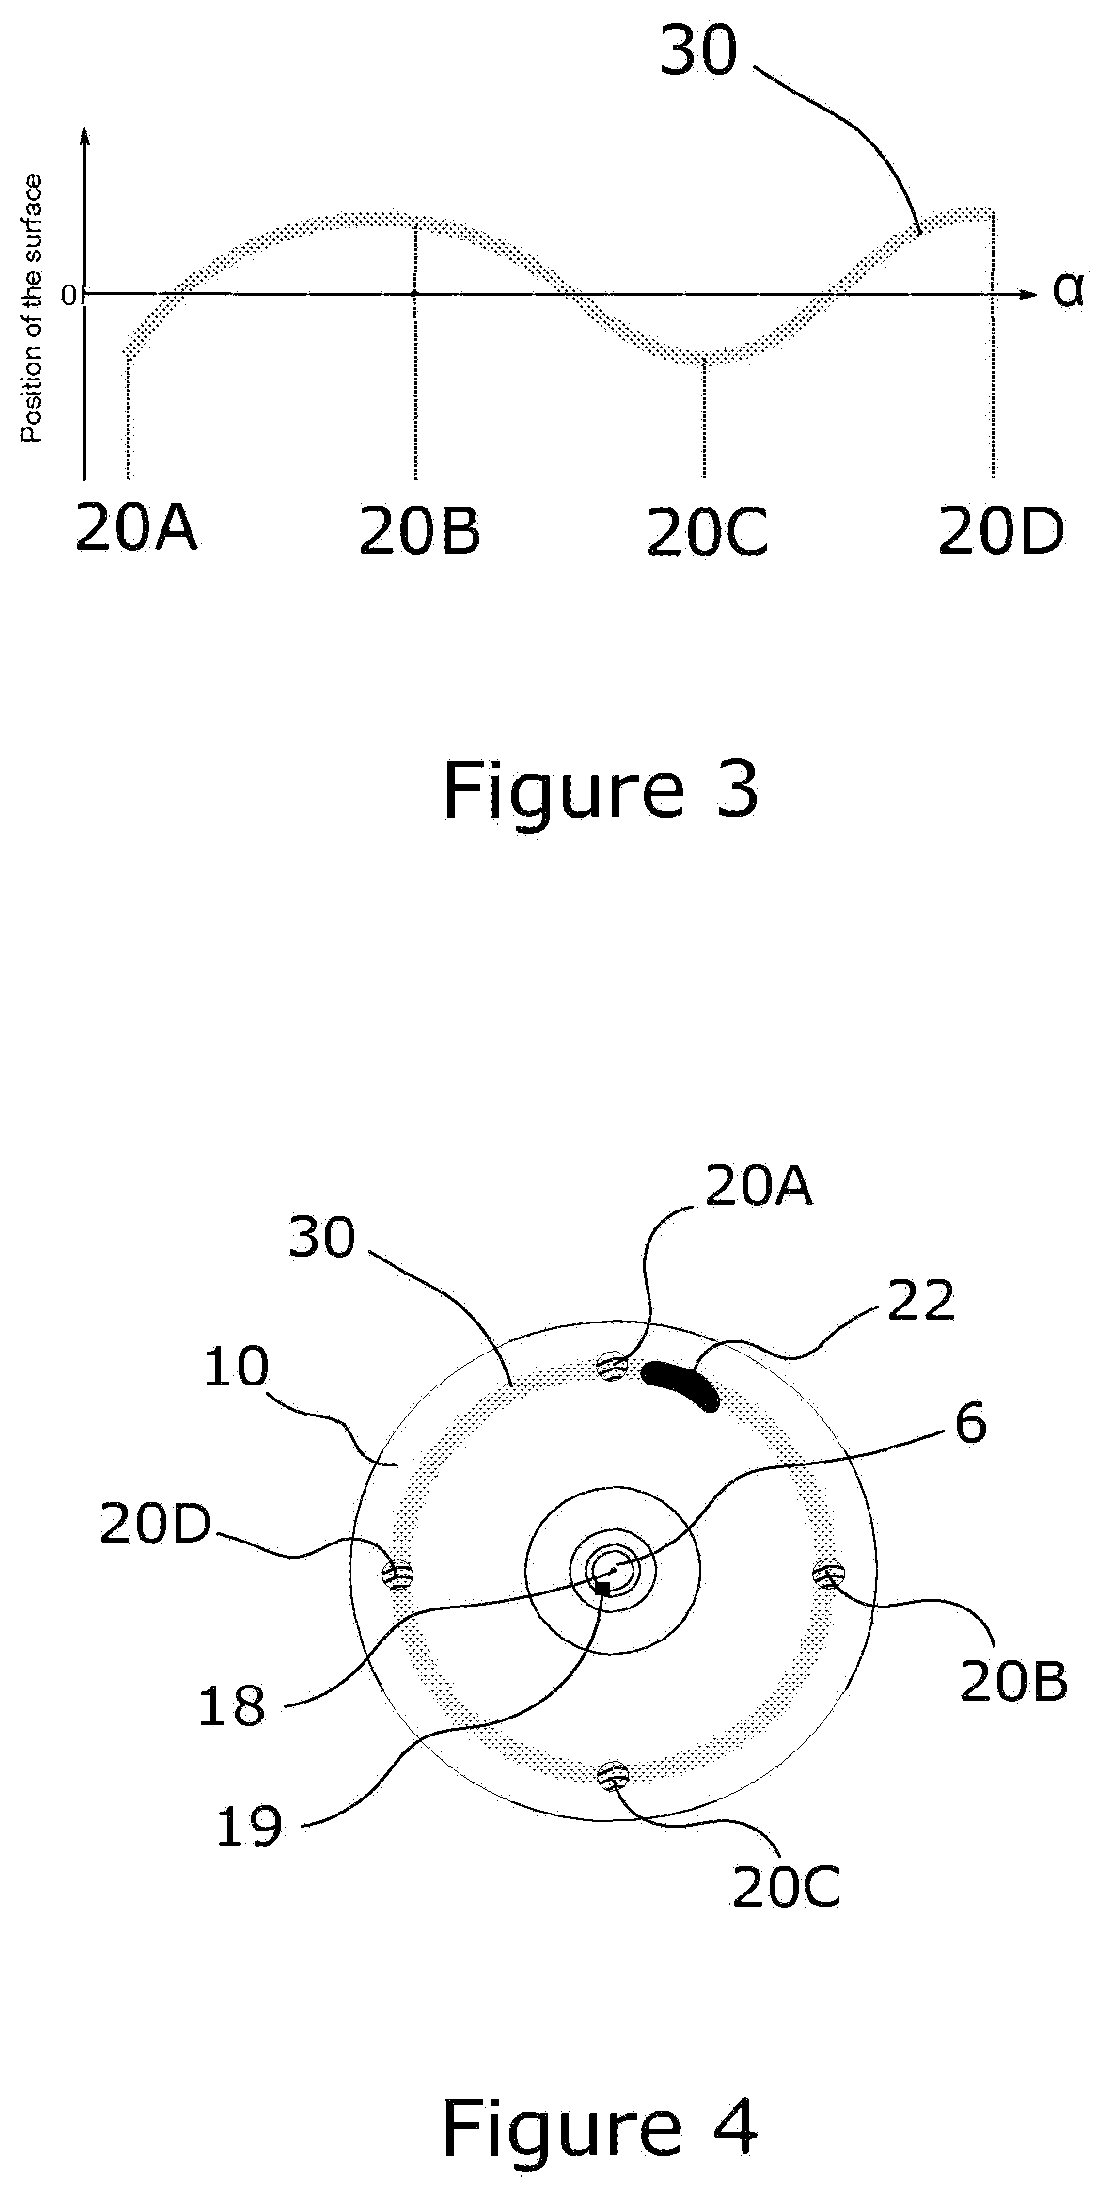 Method for balancing the out-of-balance of a shaft/wheel assembly